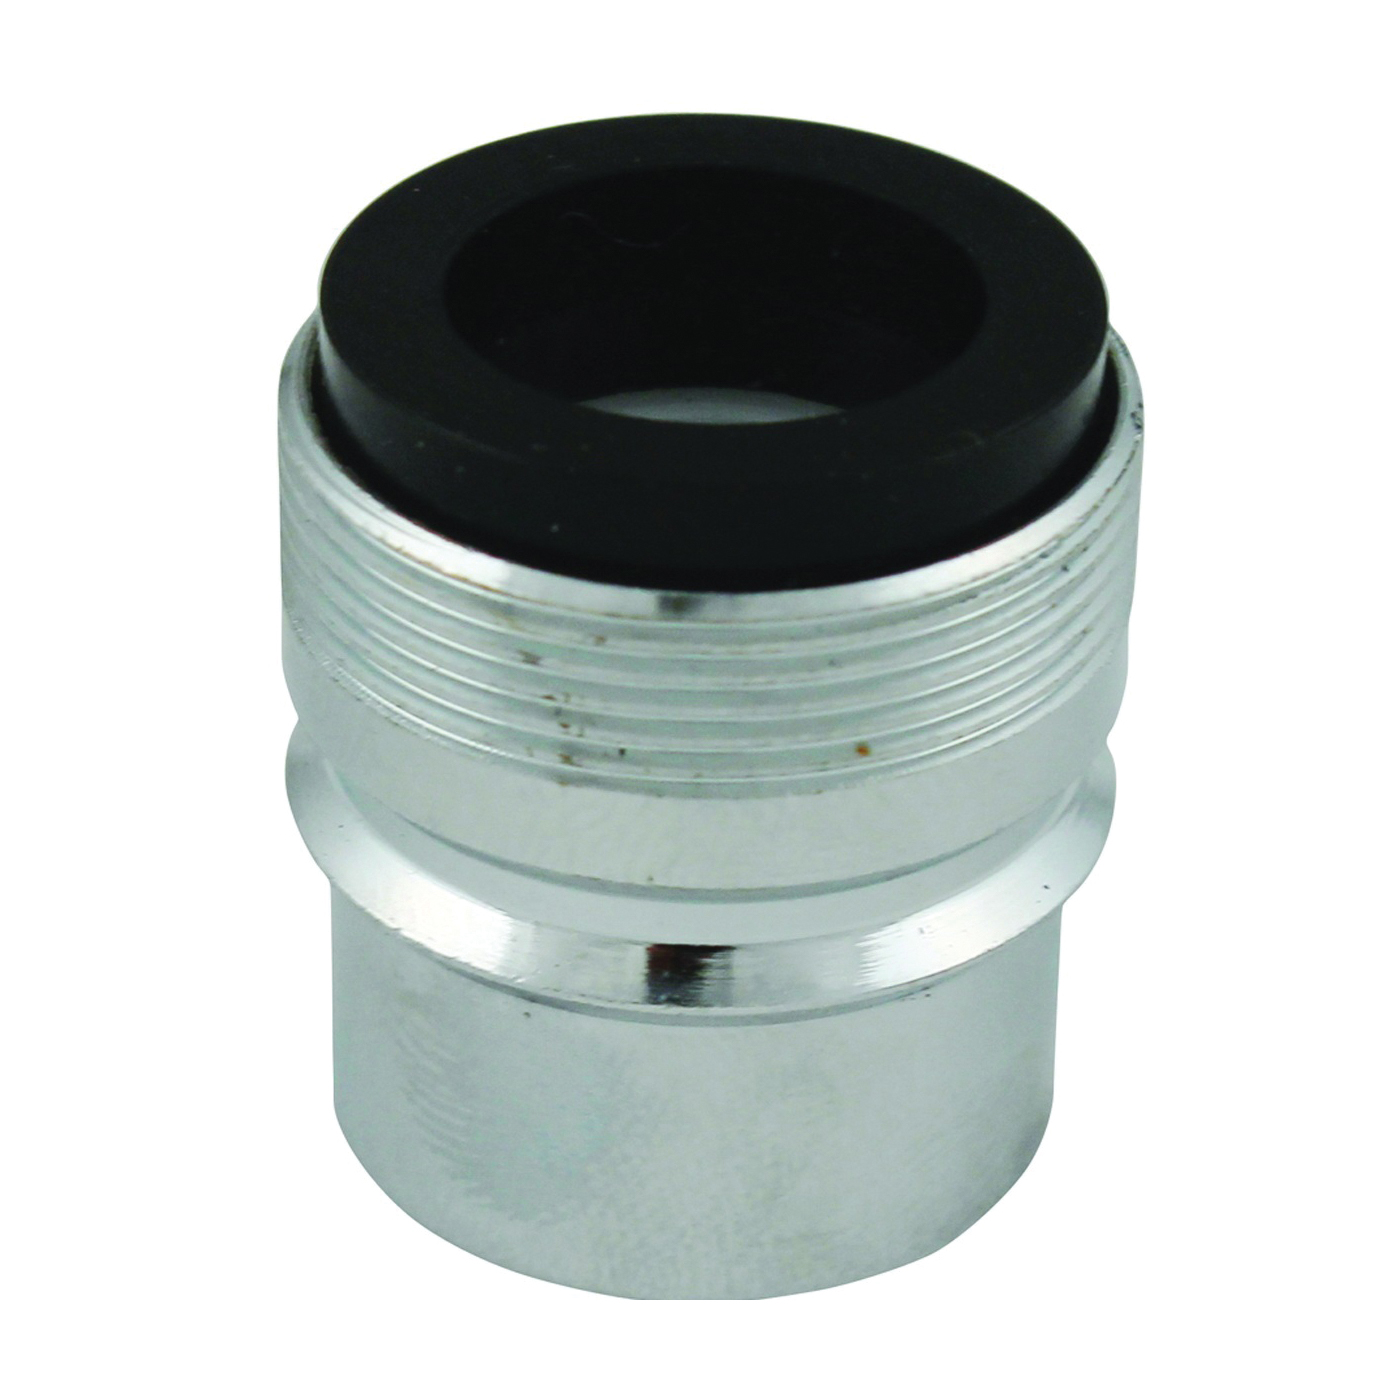 PP800-3LF Faucet Aerator, 55/64-27 x 15/16-27, Brass, Chrome Plated